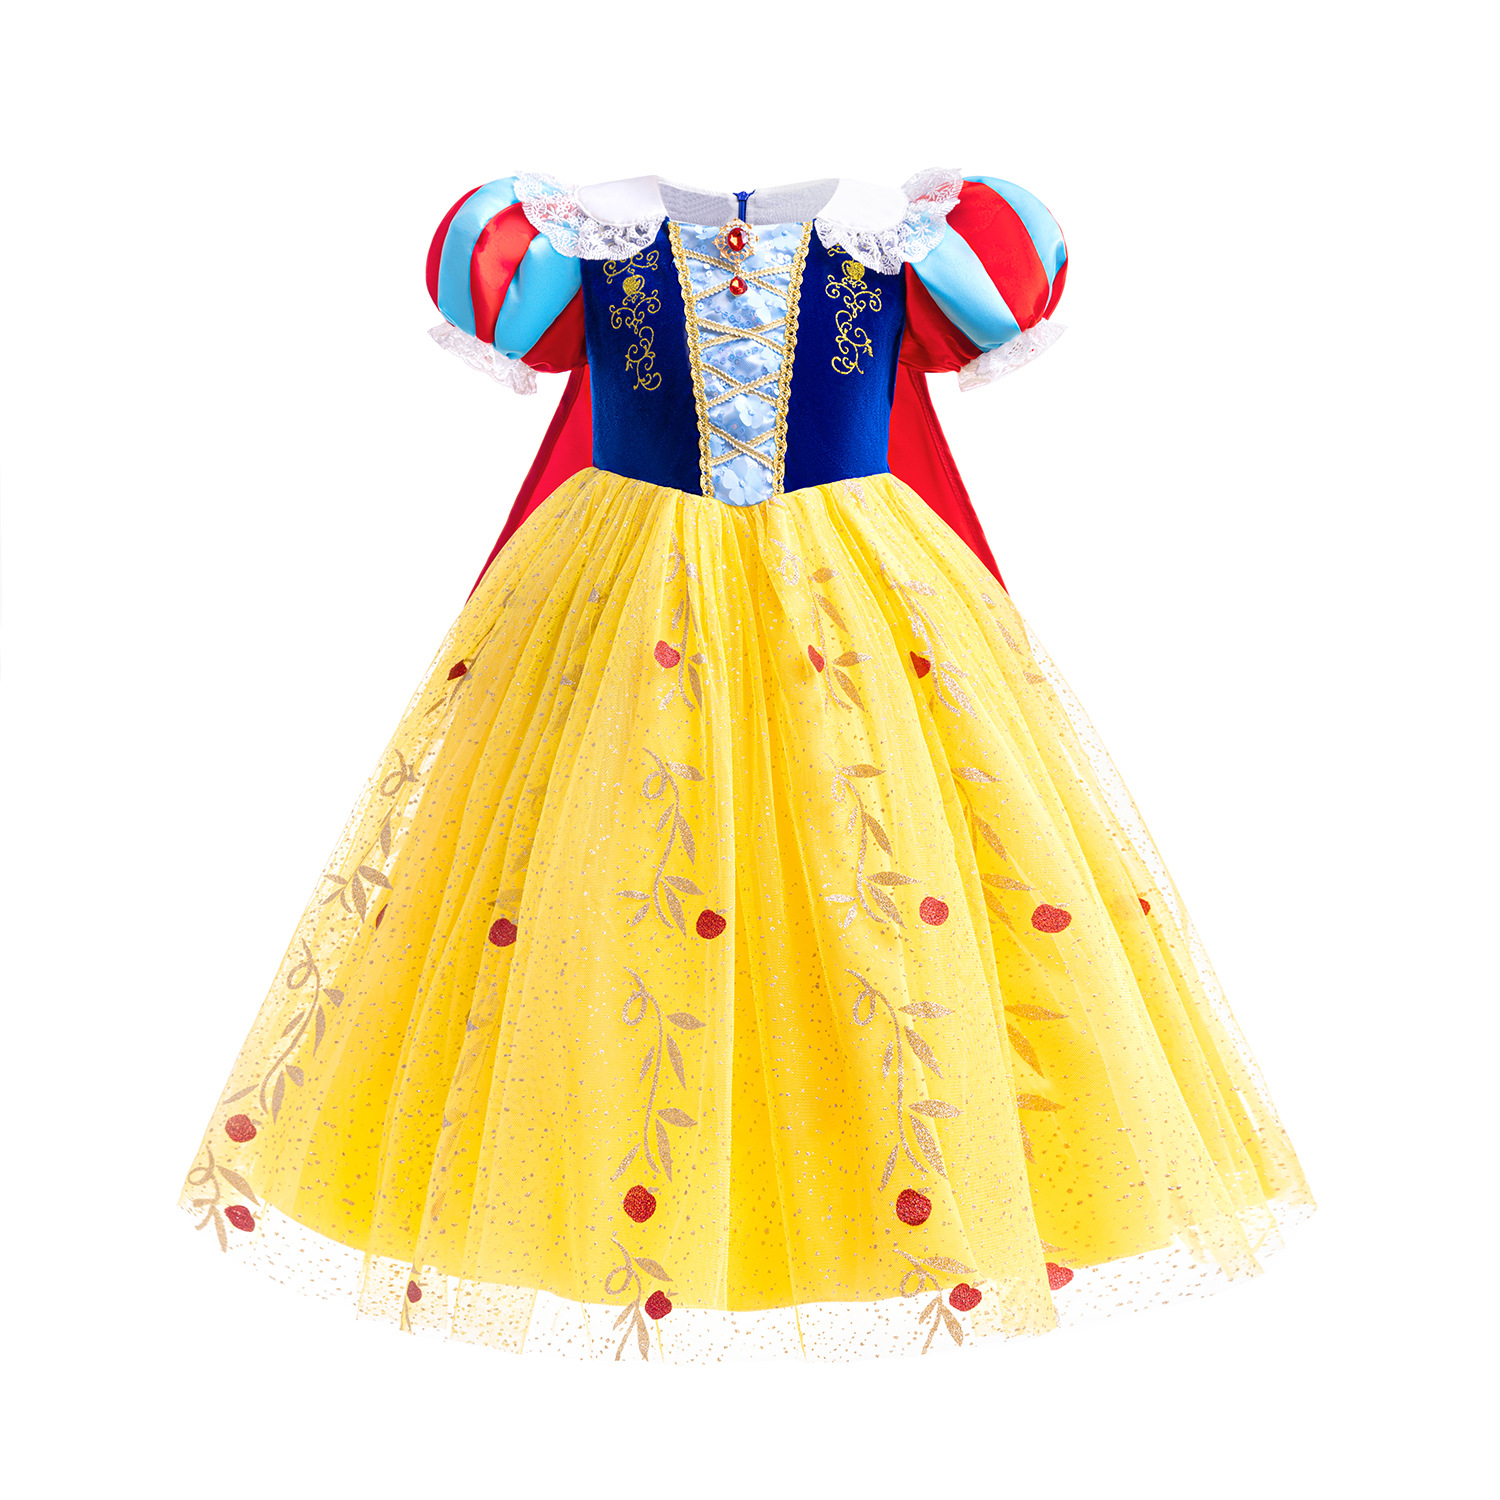 Journée pour enfants Cosplay Party Robes Girls broderie Revers Puff Sleeve Lace Tulle Robe Kids Halloween Festival Performance Vêtements Z7854